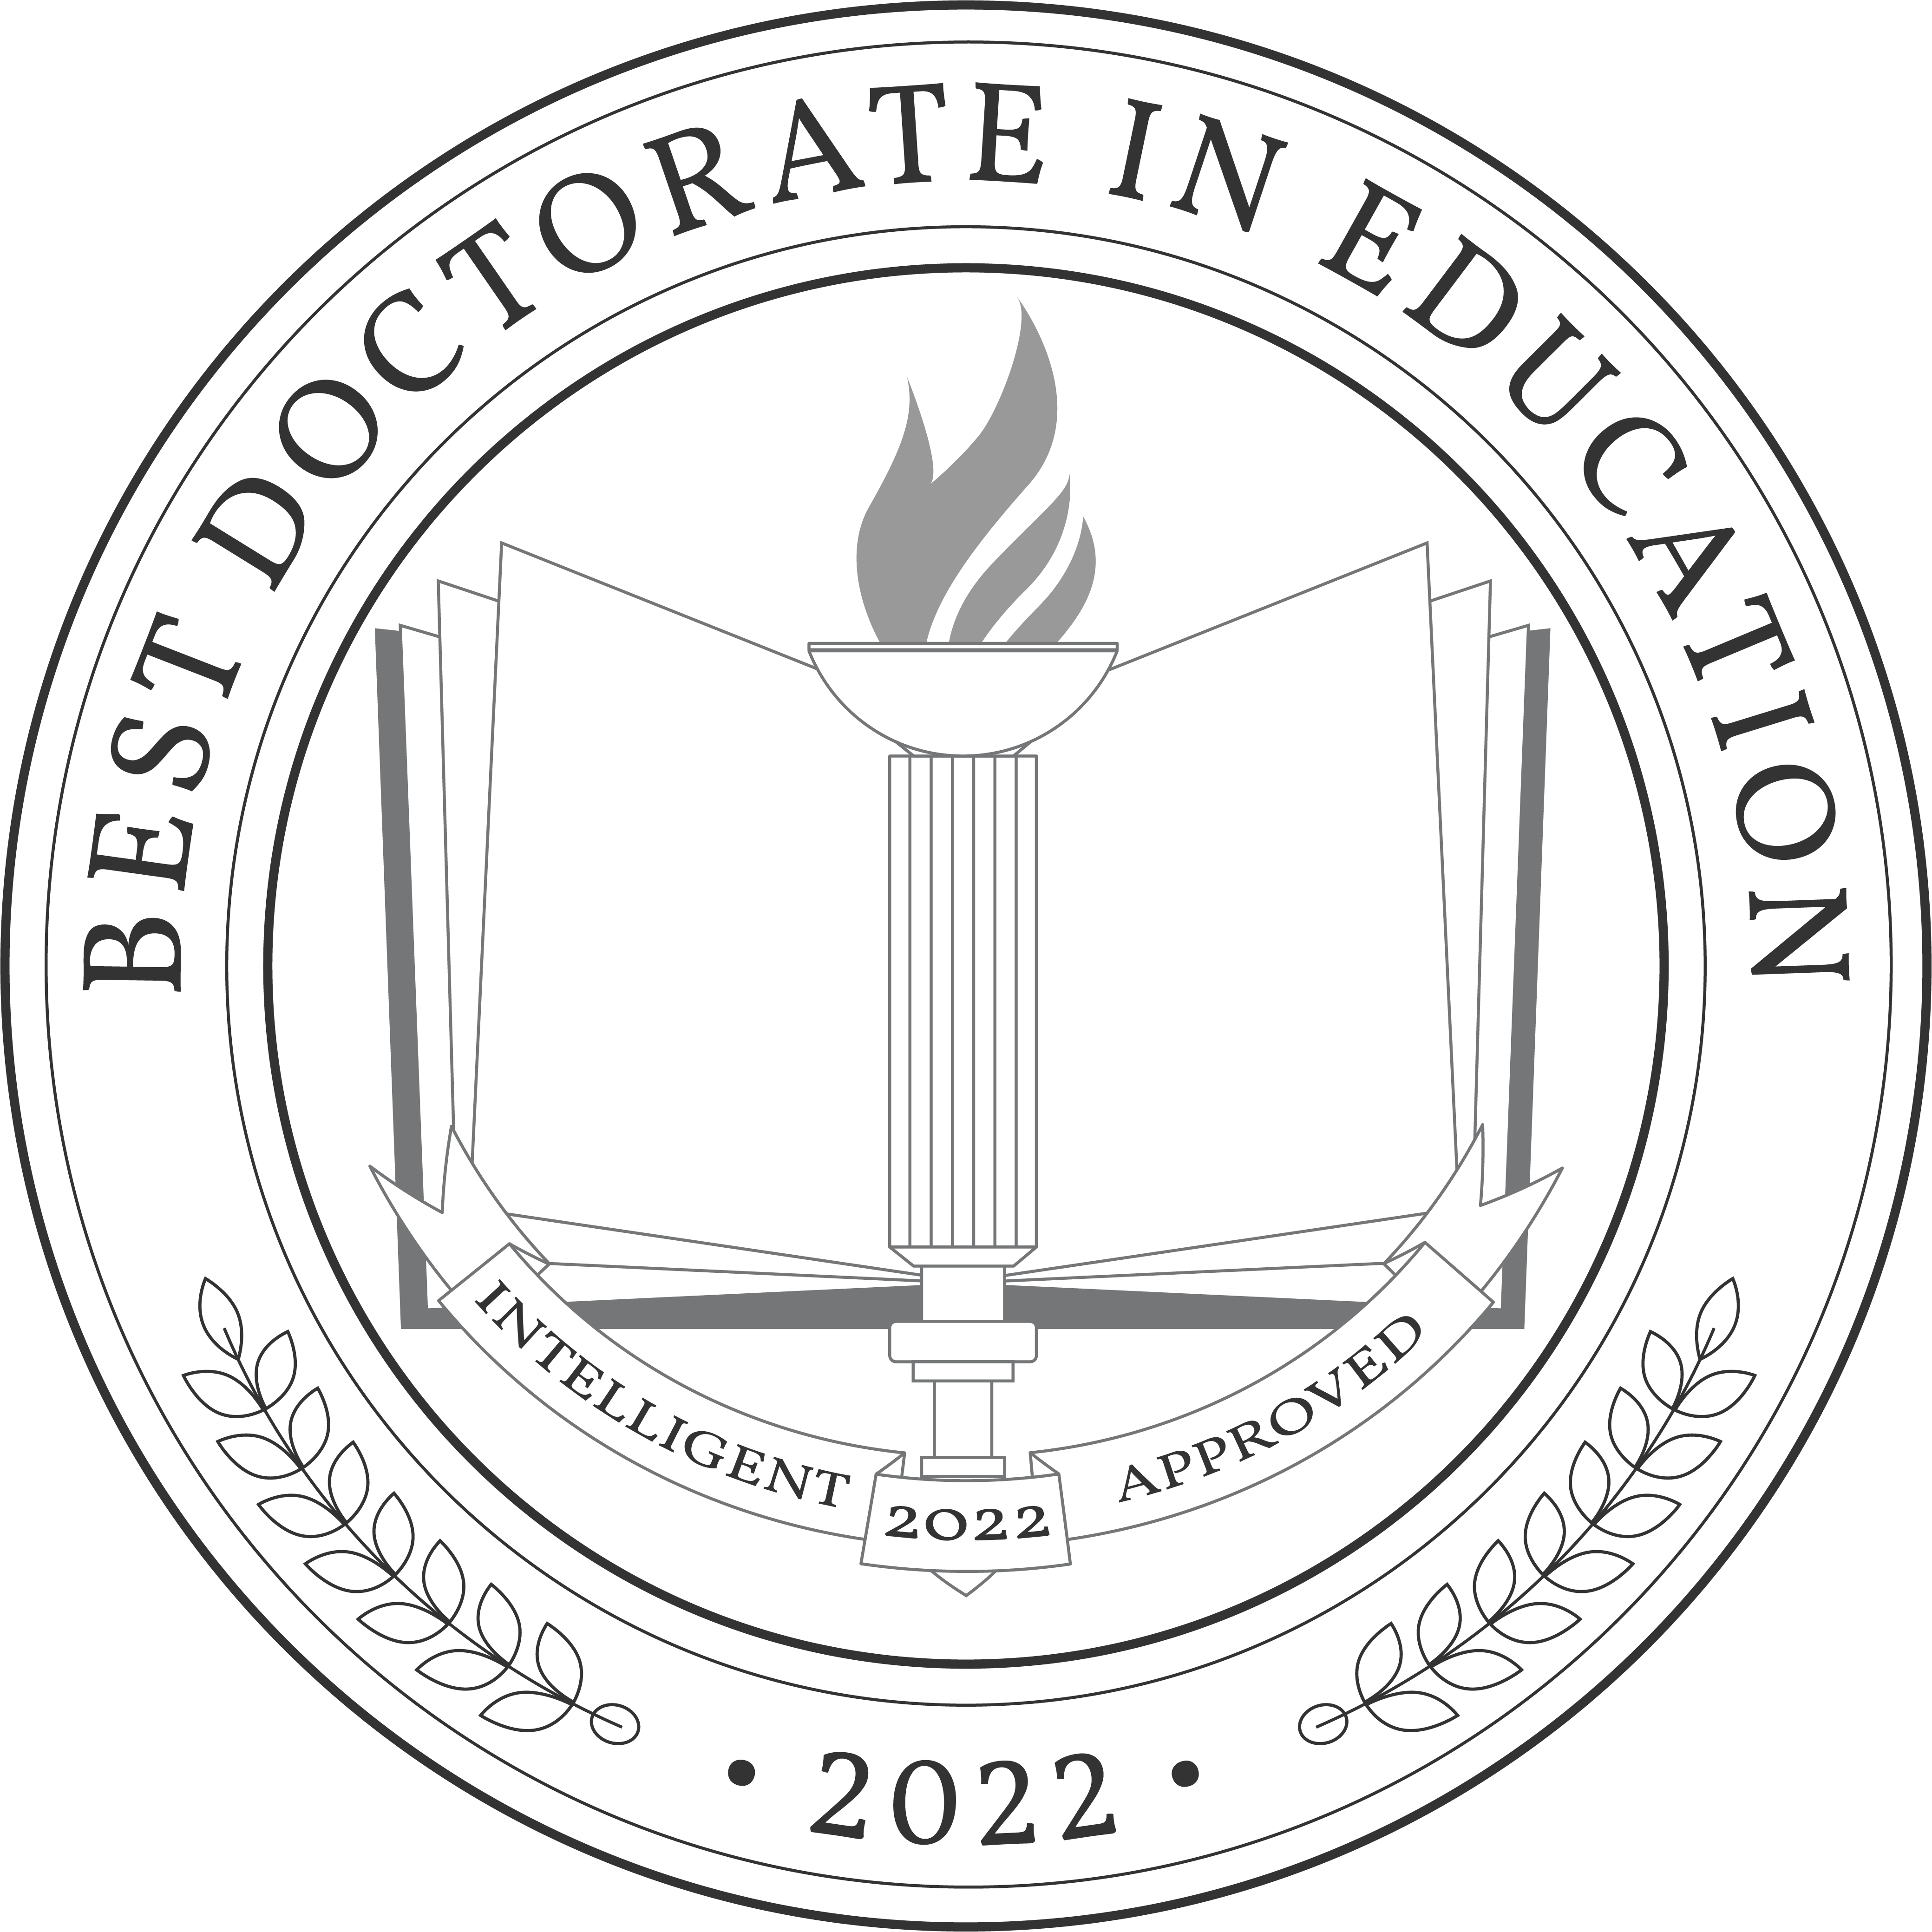 doctorate in education fellowship